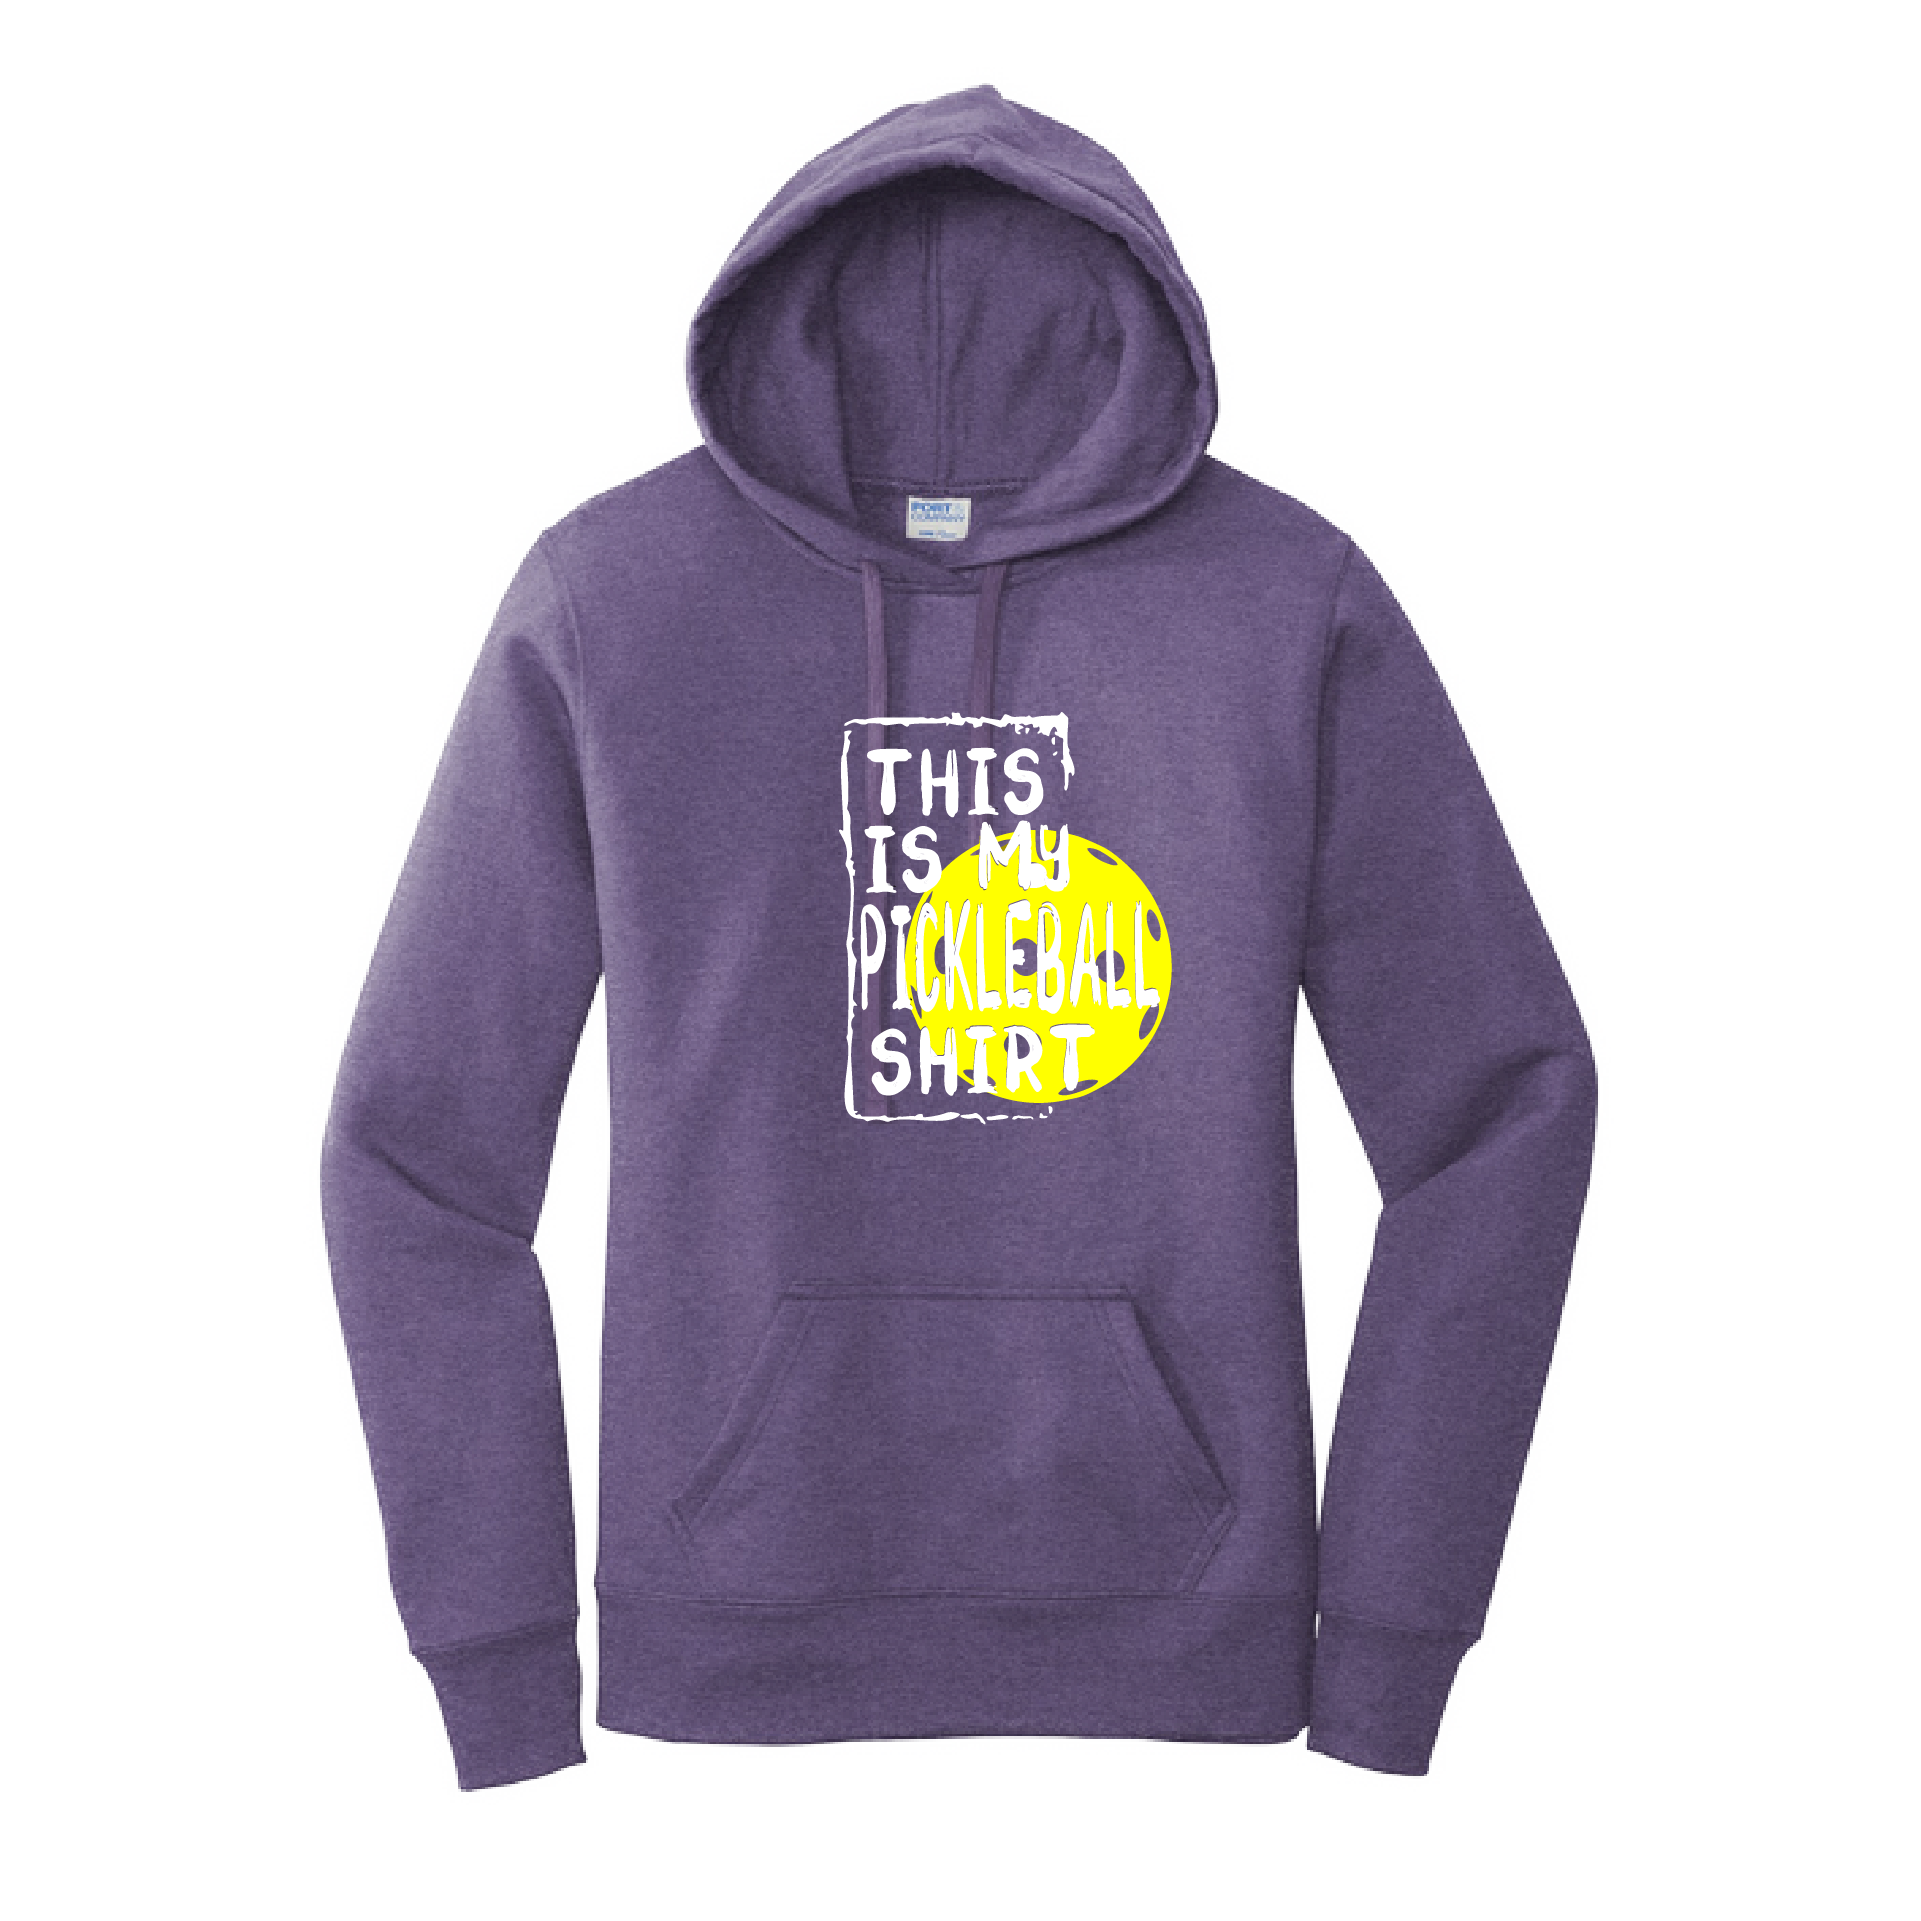 Pickleball Design: This is my Pickleball shirt  Women's Hooded pullover Sweatshirt  Turn up the volume in this Women's Sweatshirts with its perfect mix of softness and attitude. Ultra soft lined inside with a lined hood also. This is fitted nicely for a women's figure. Front pouch pocket.